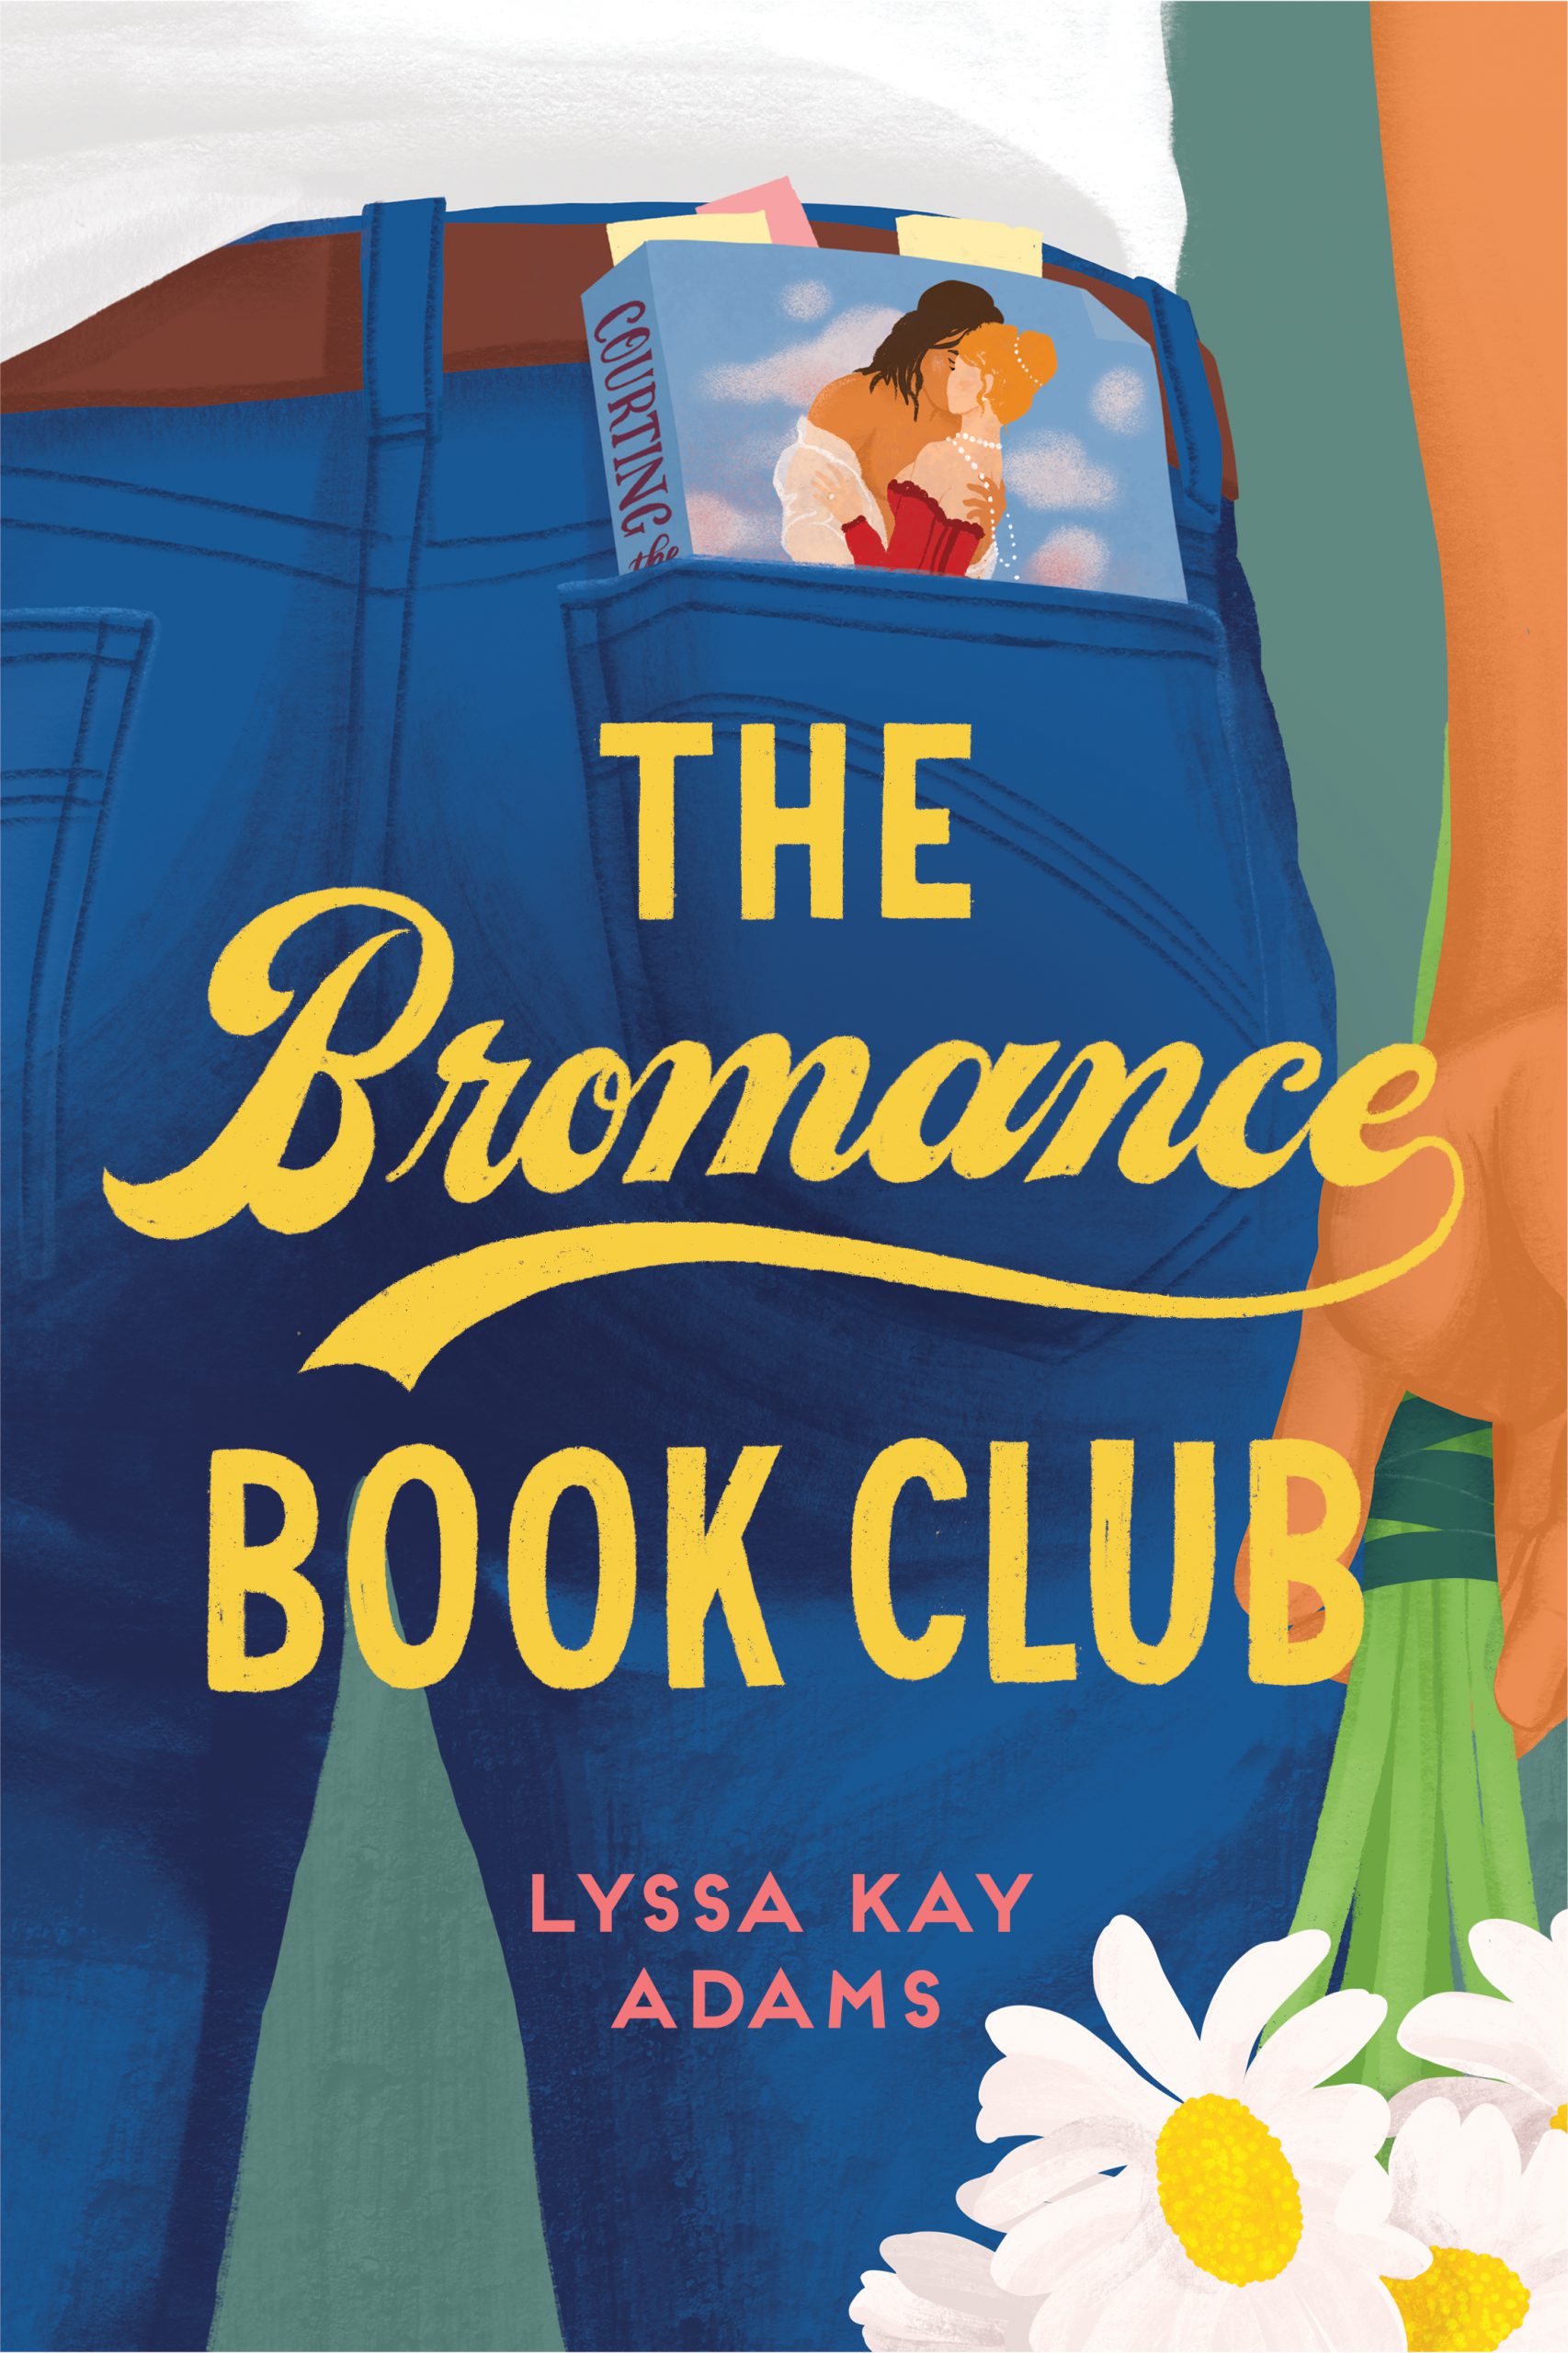 Front cover art for book 1, The Bromance Book Club.